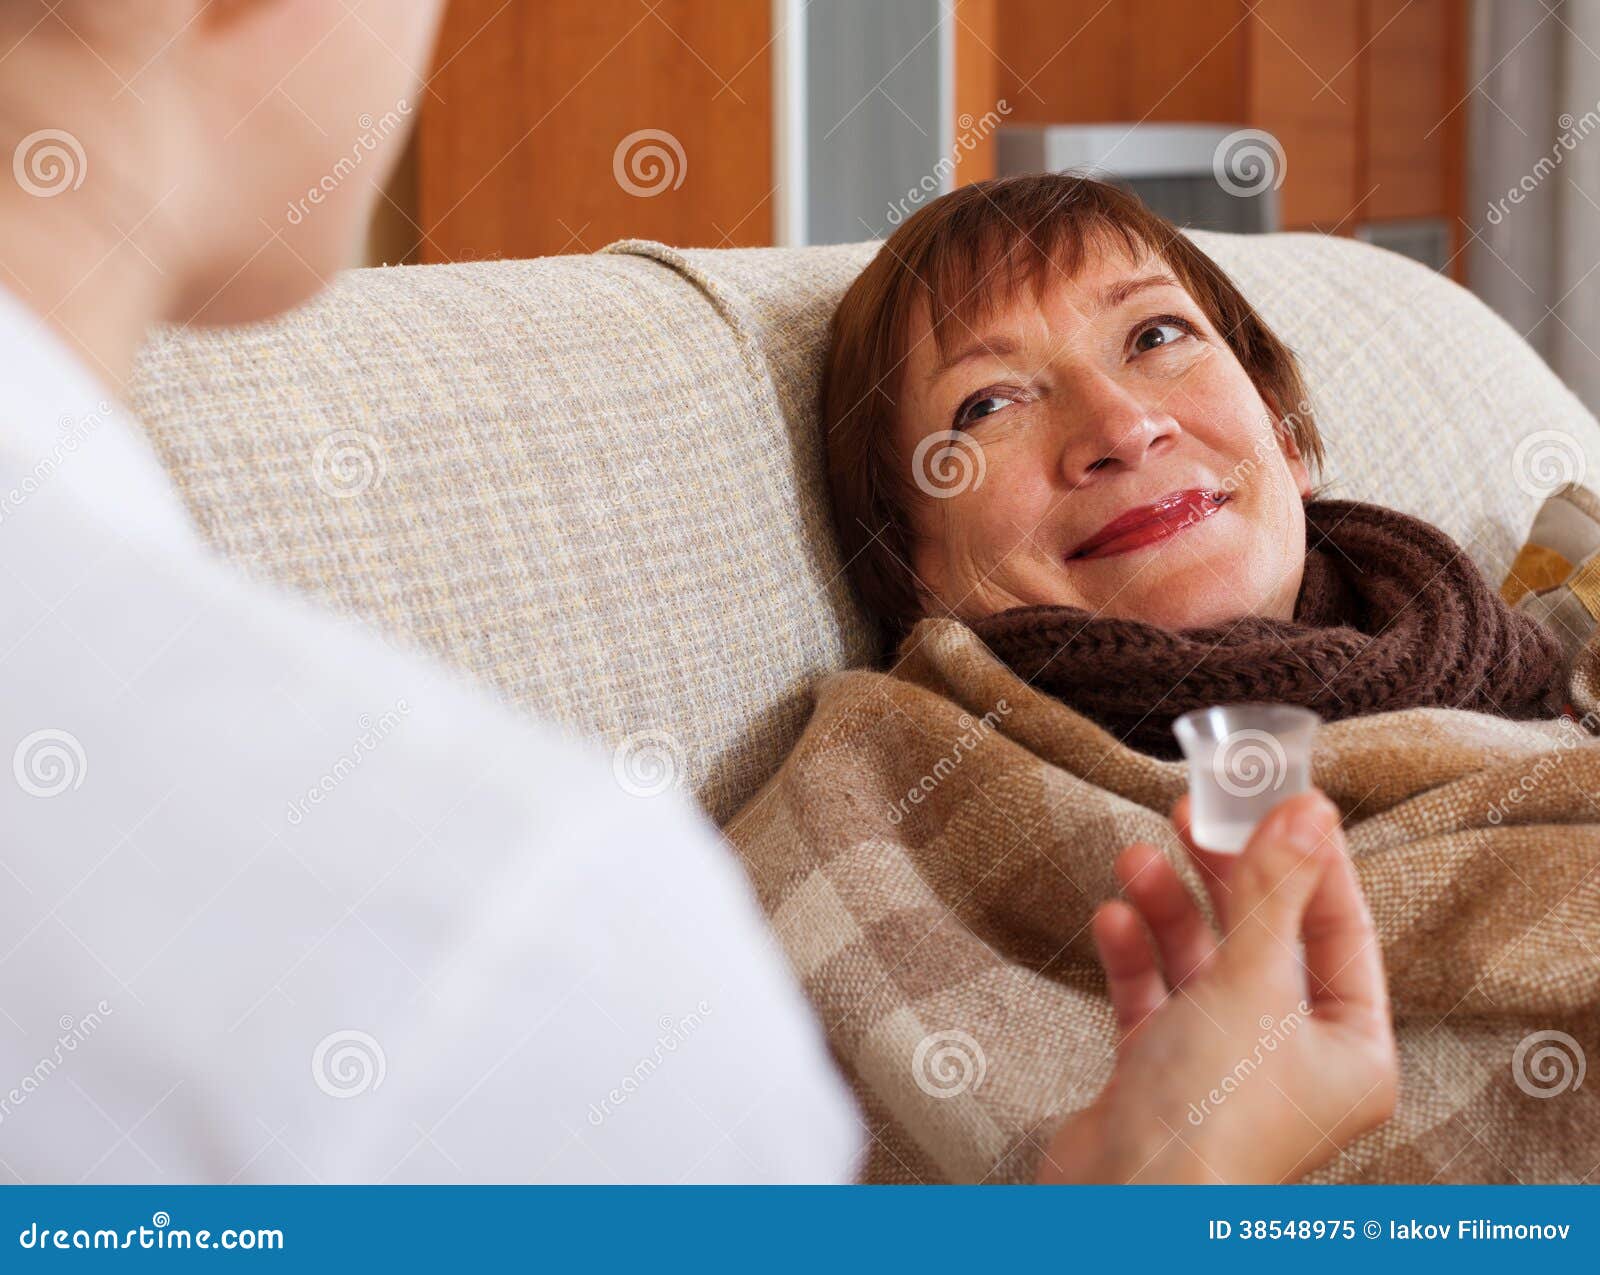 nurse caring for sick mature woman at home